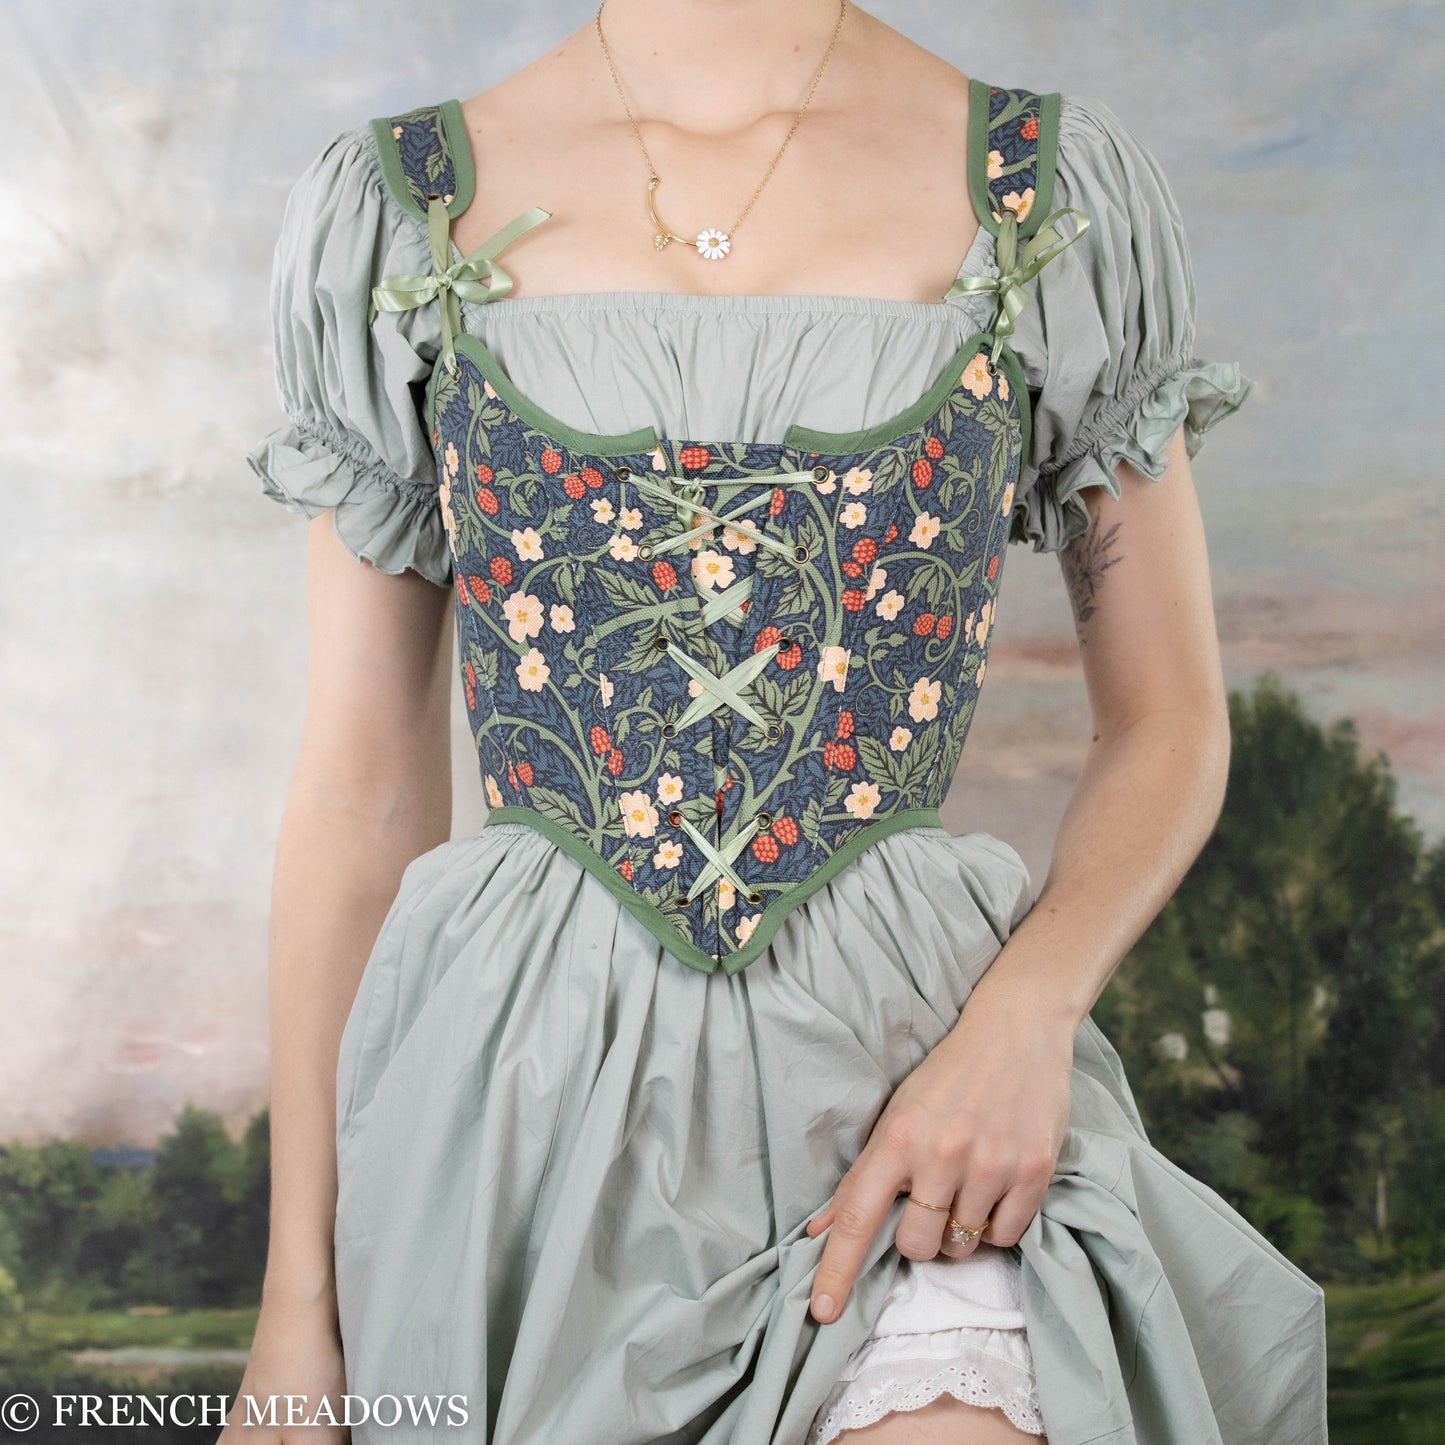 Load image into Gallery viewer, Victorian Raspberries Renaissance Bodice
